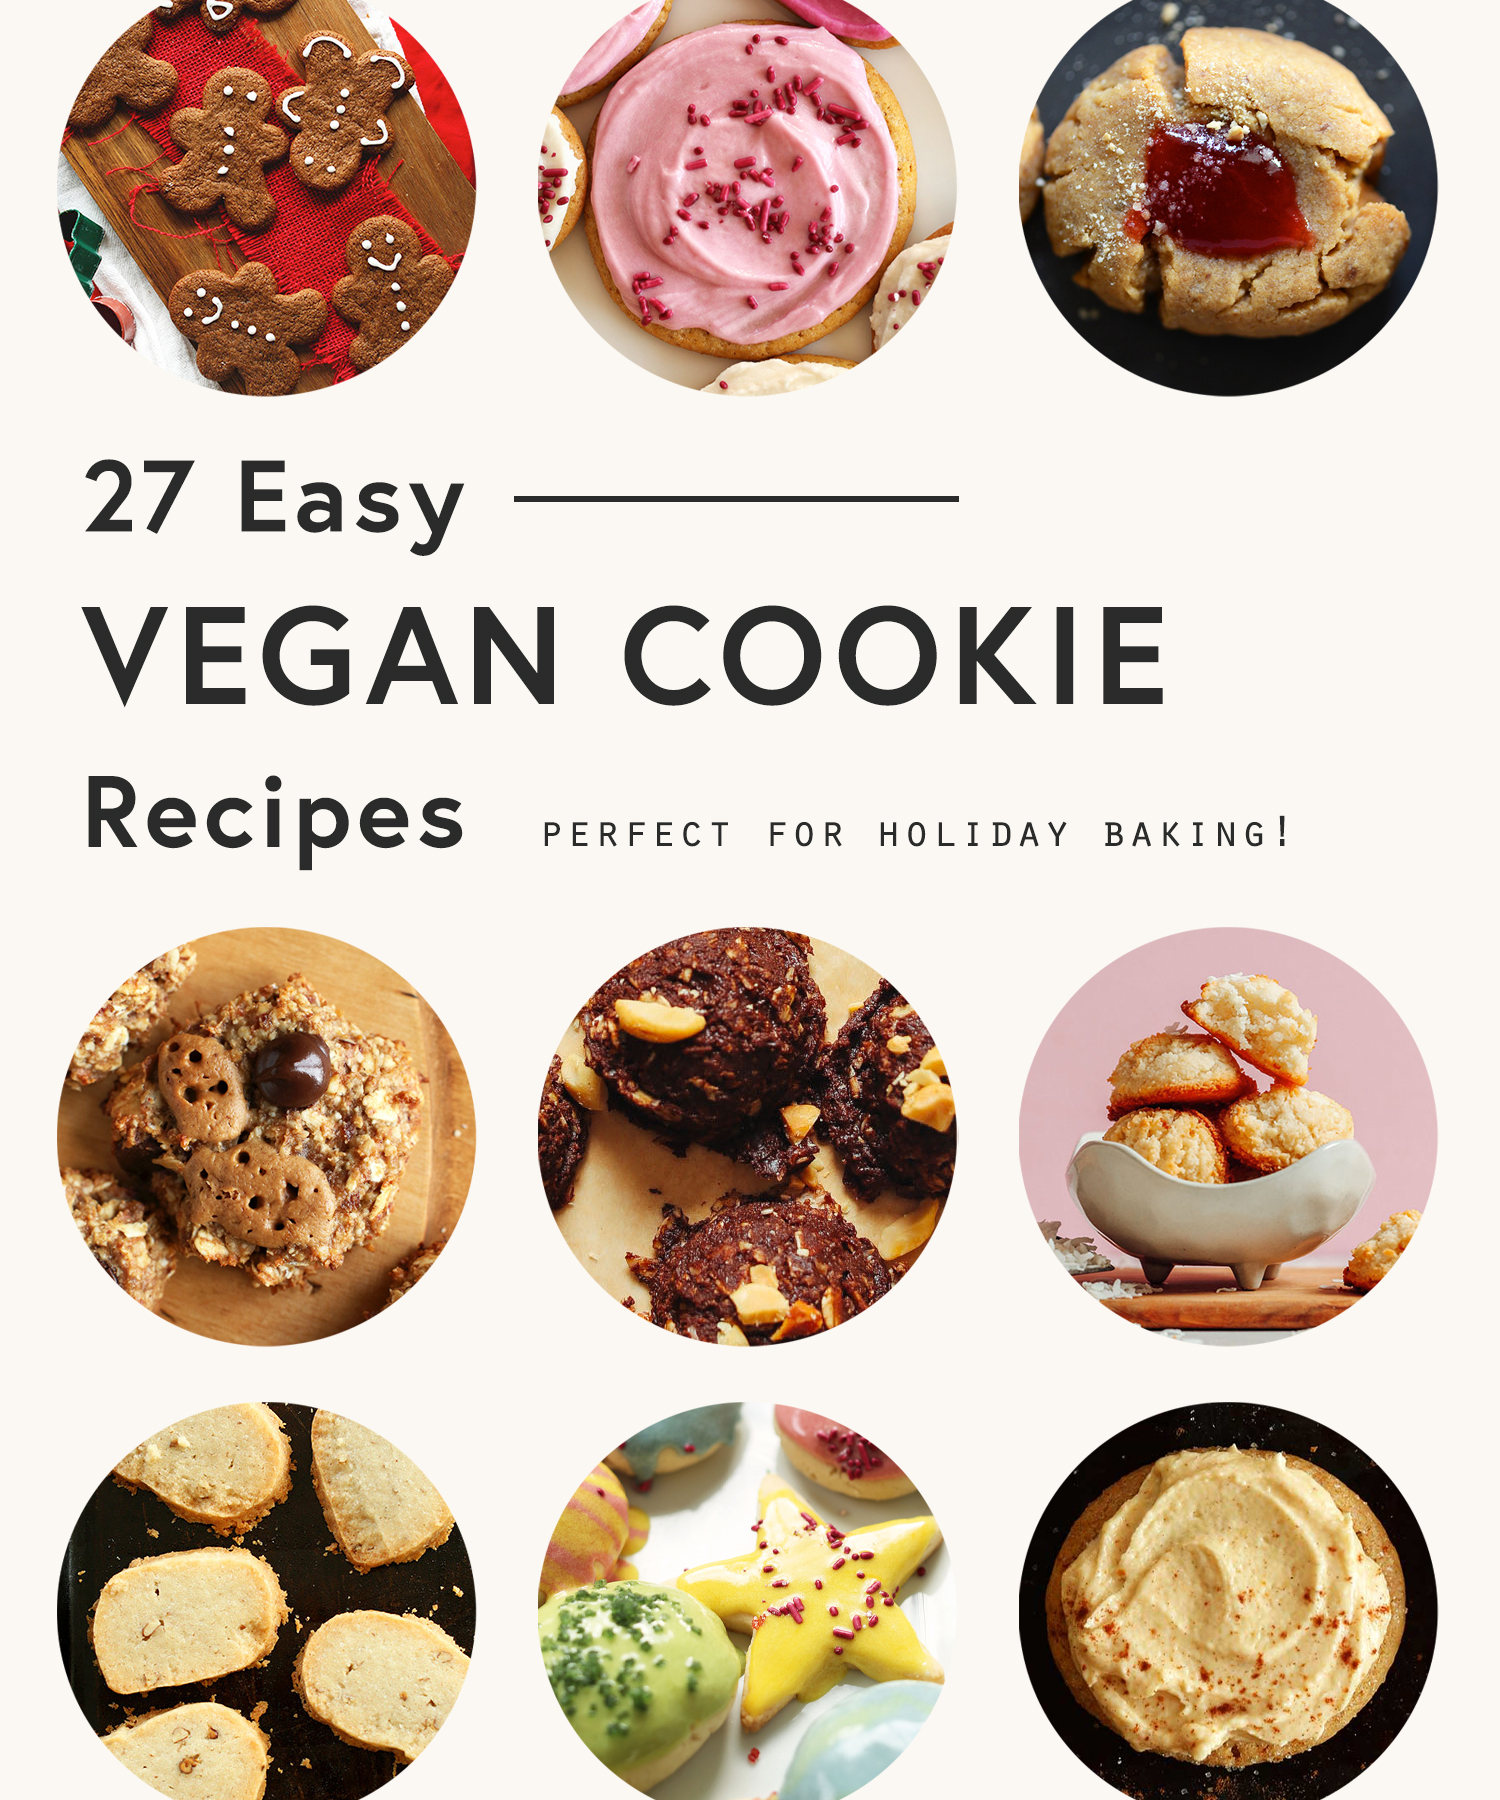 Photos of an assortment of easy vegan cookie recipes